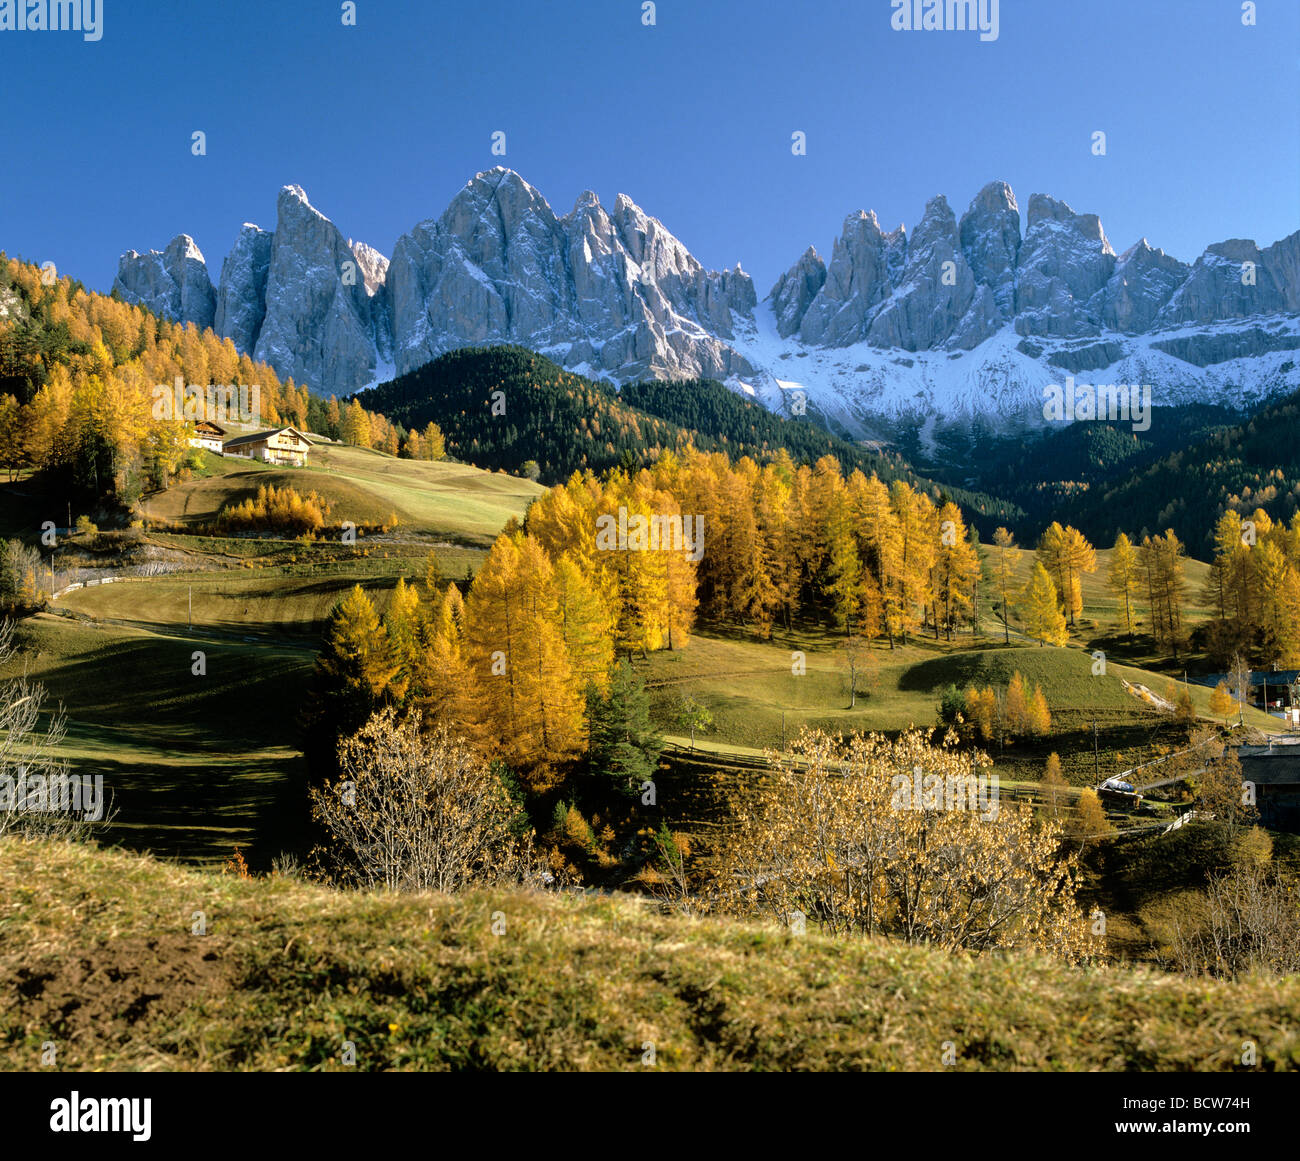 St. Magdalena, Geislergruppe mountains, larch trees, autumn, Villnoess valley, South Tyrol, Italy, Europe Stock Photo